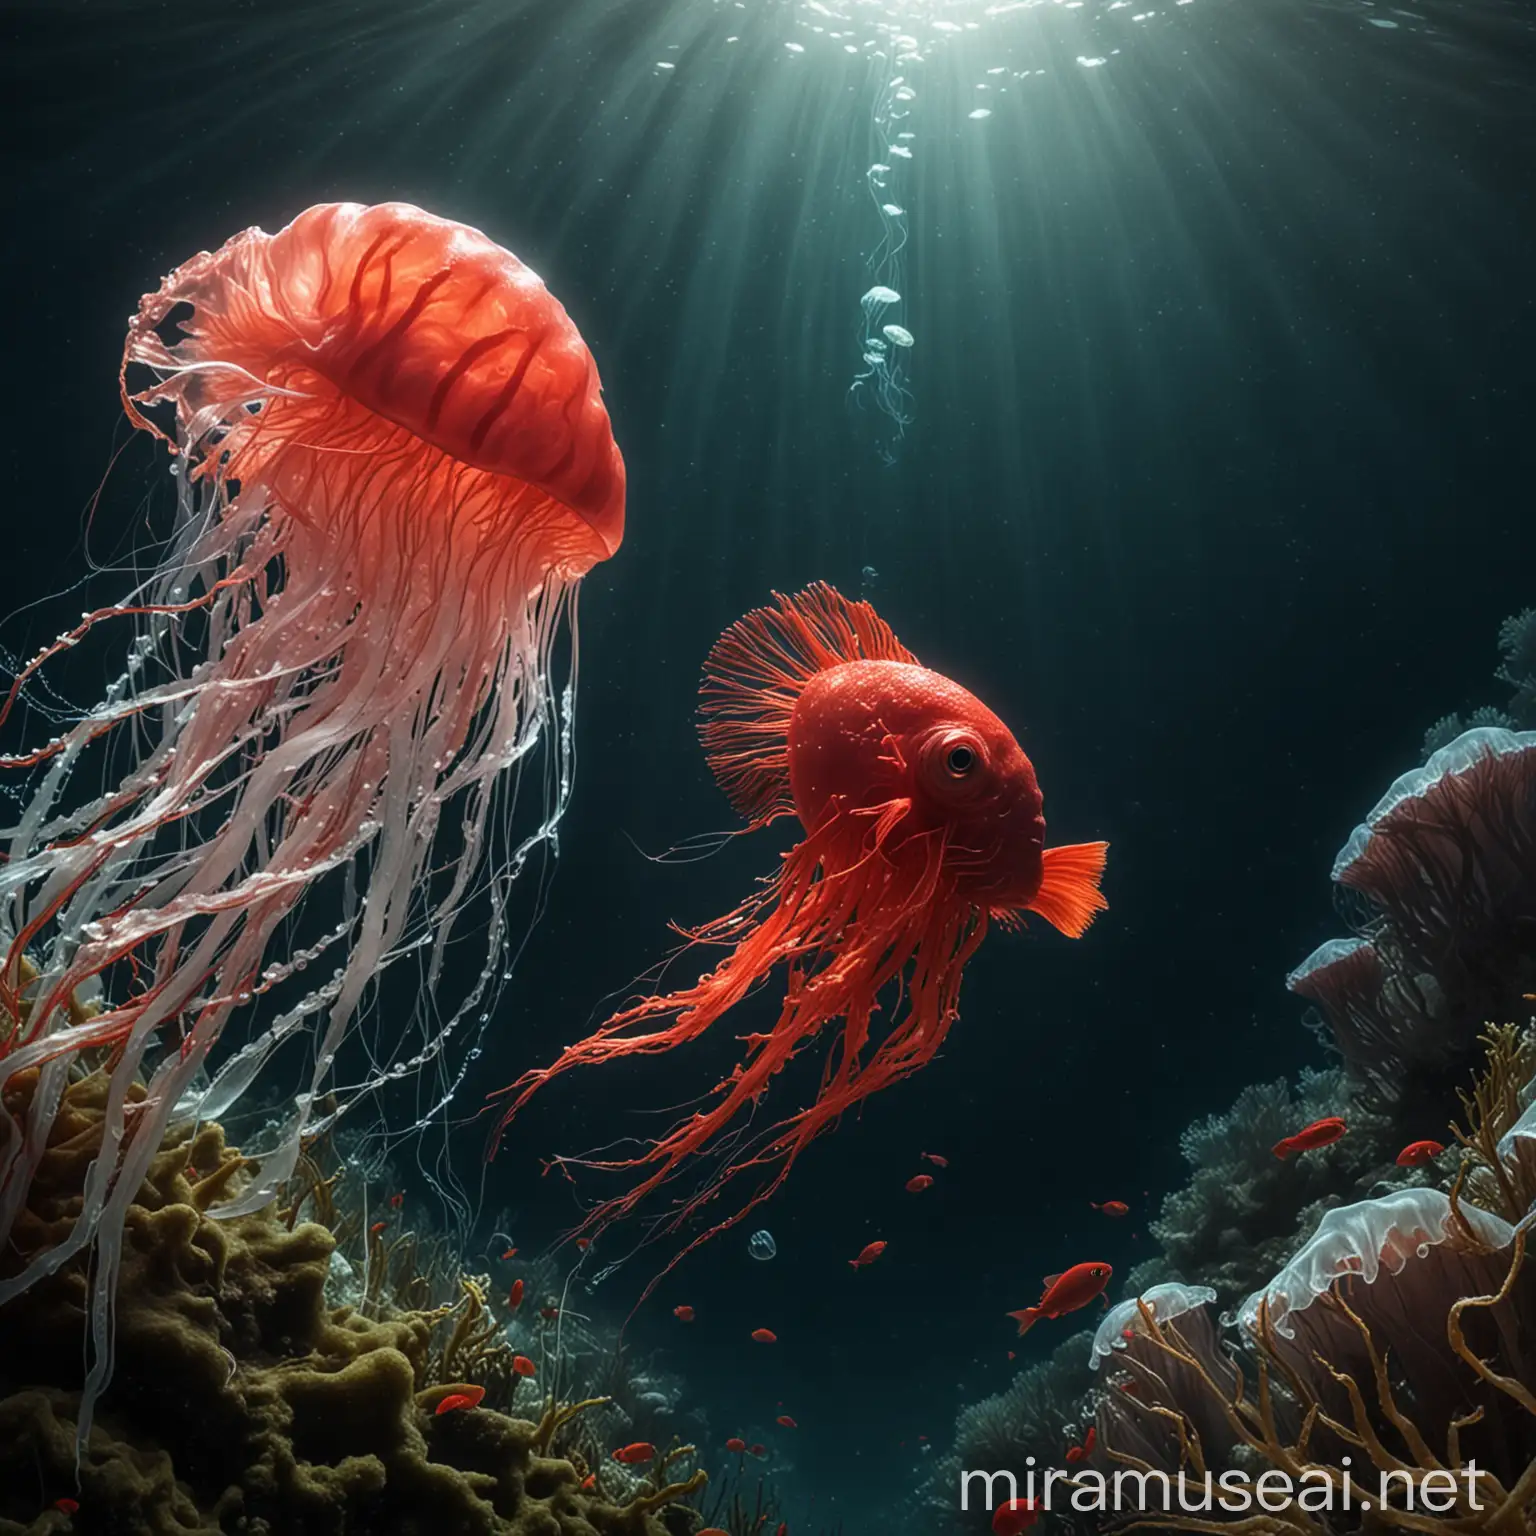 Could you create an image of a small red fish named Ricky swimming alongside a wise-looking jellyfish named Jerry in the depths of the ocean?"